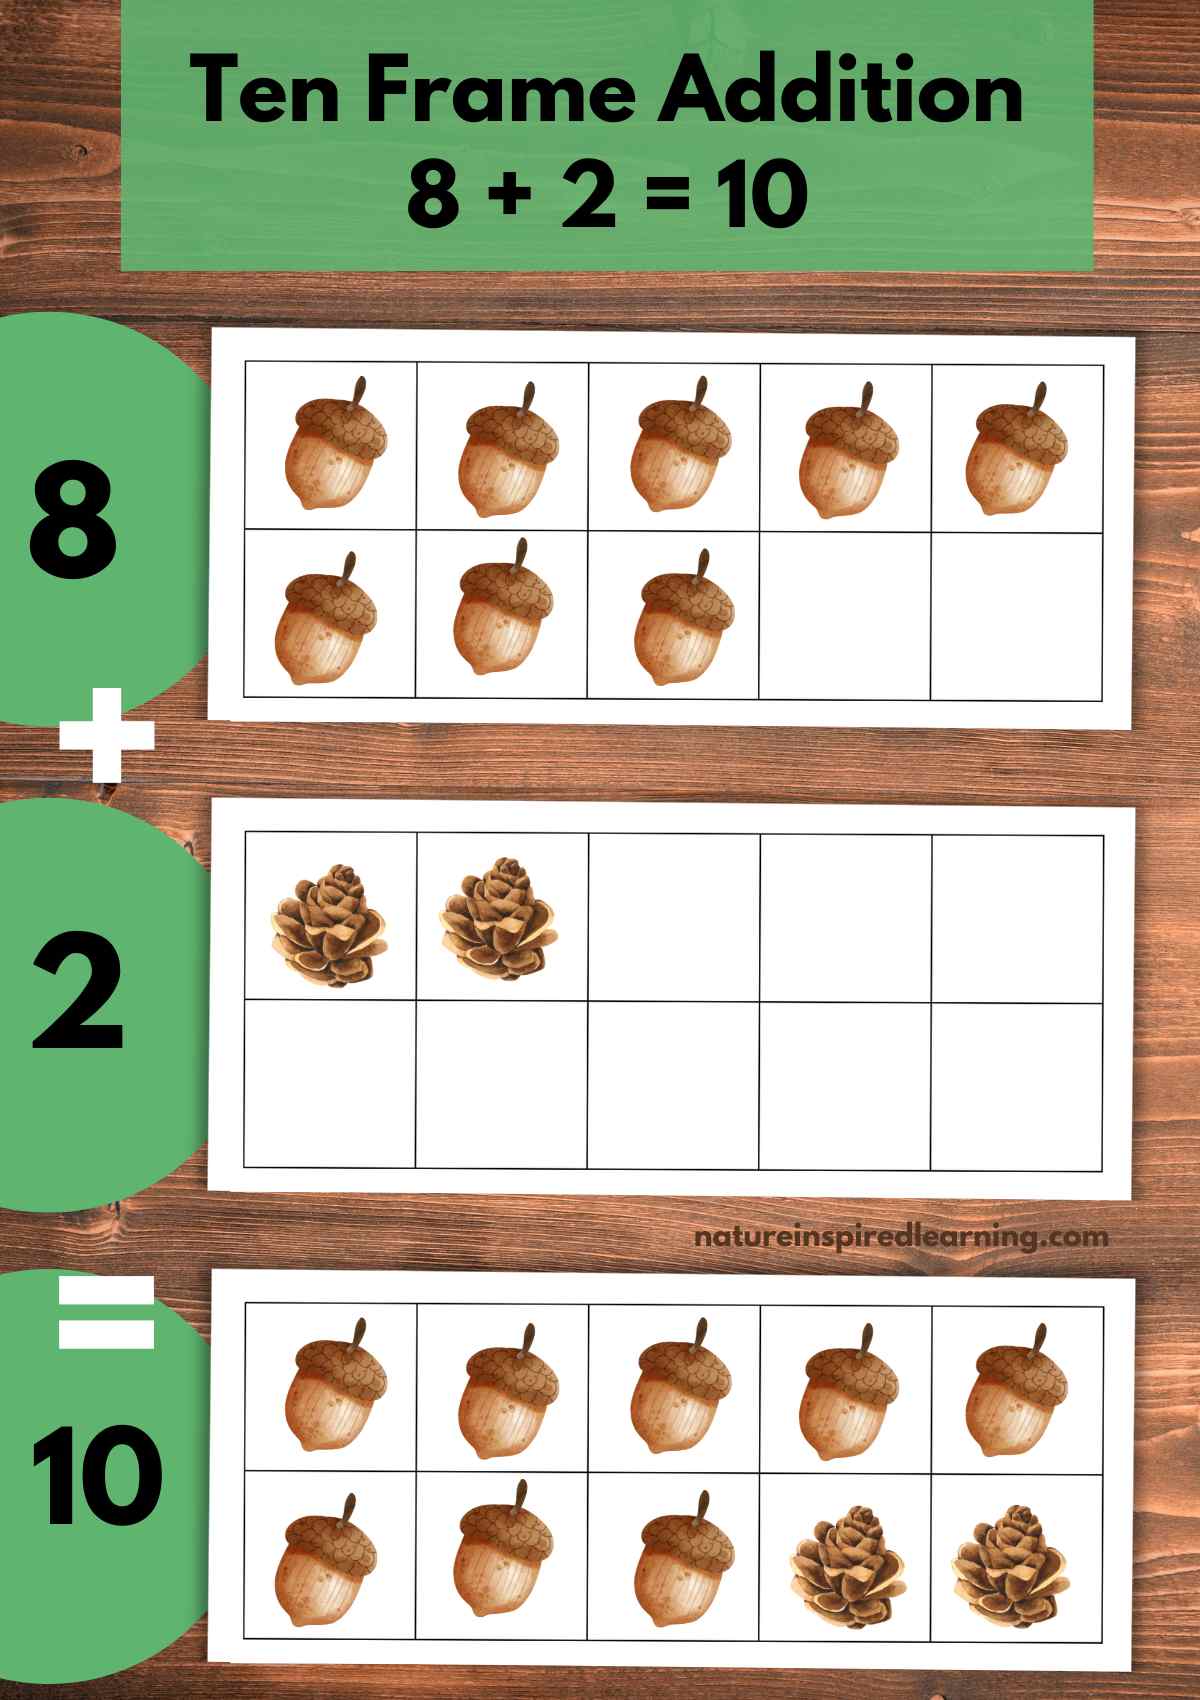 Wooden background with a label across the top with a green rectangle. Three ten frames one above the next with acorns and pine cones inside the boxes. Numbers 8, 2, and 10 in circles on the far left with a + and an = sign.